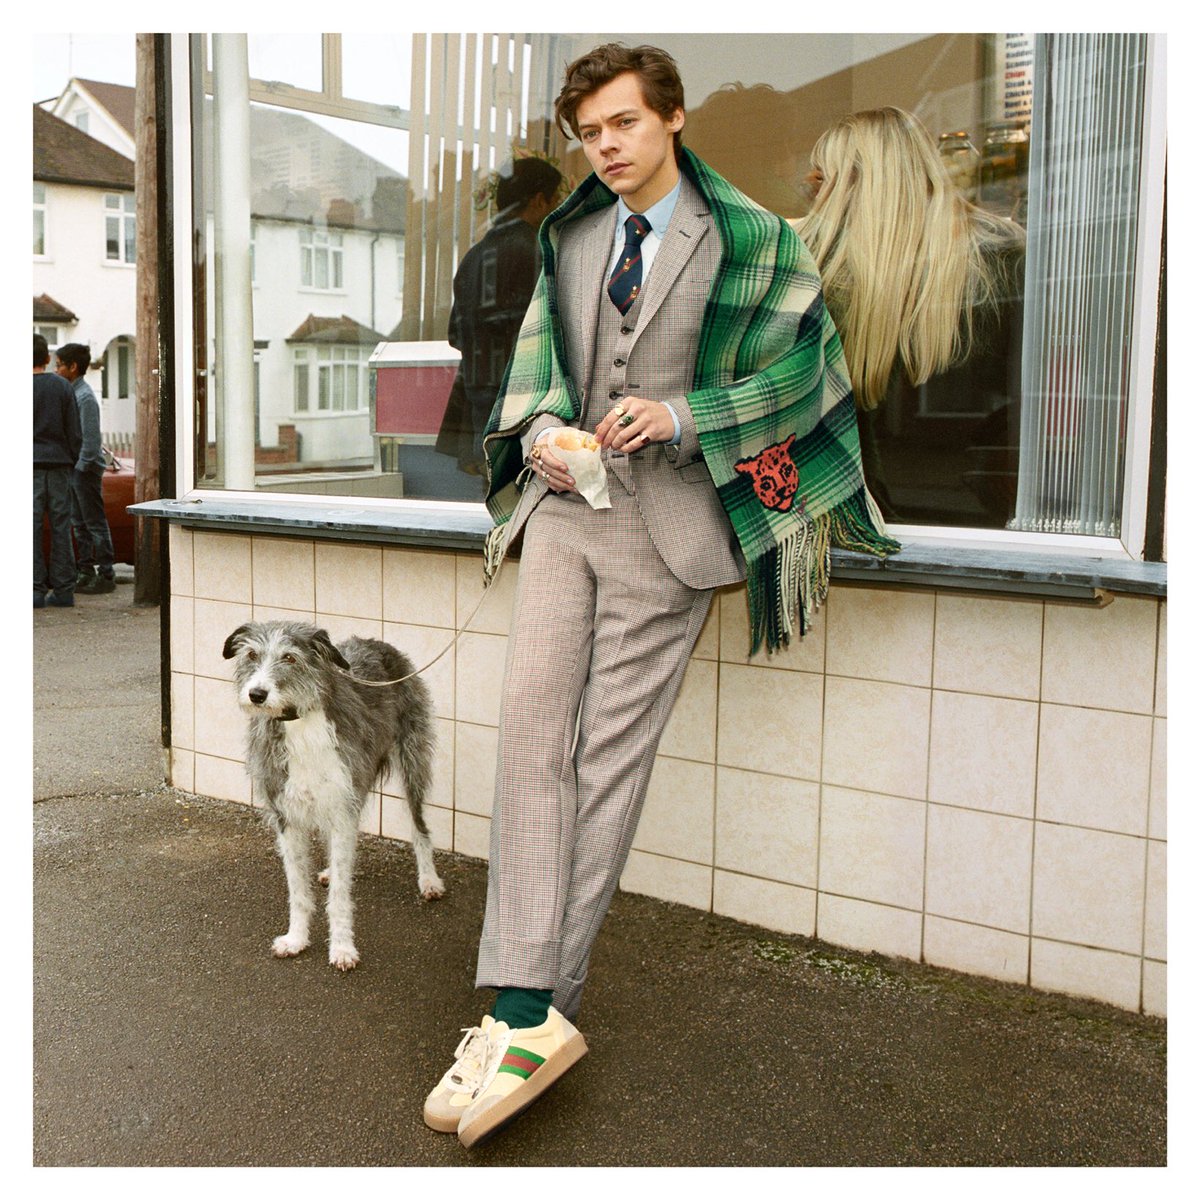 Harry Styles Gucci Campaign